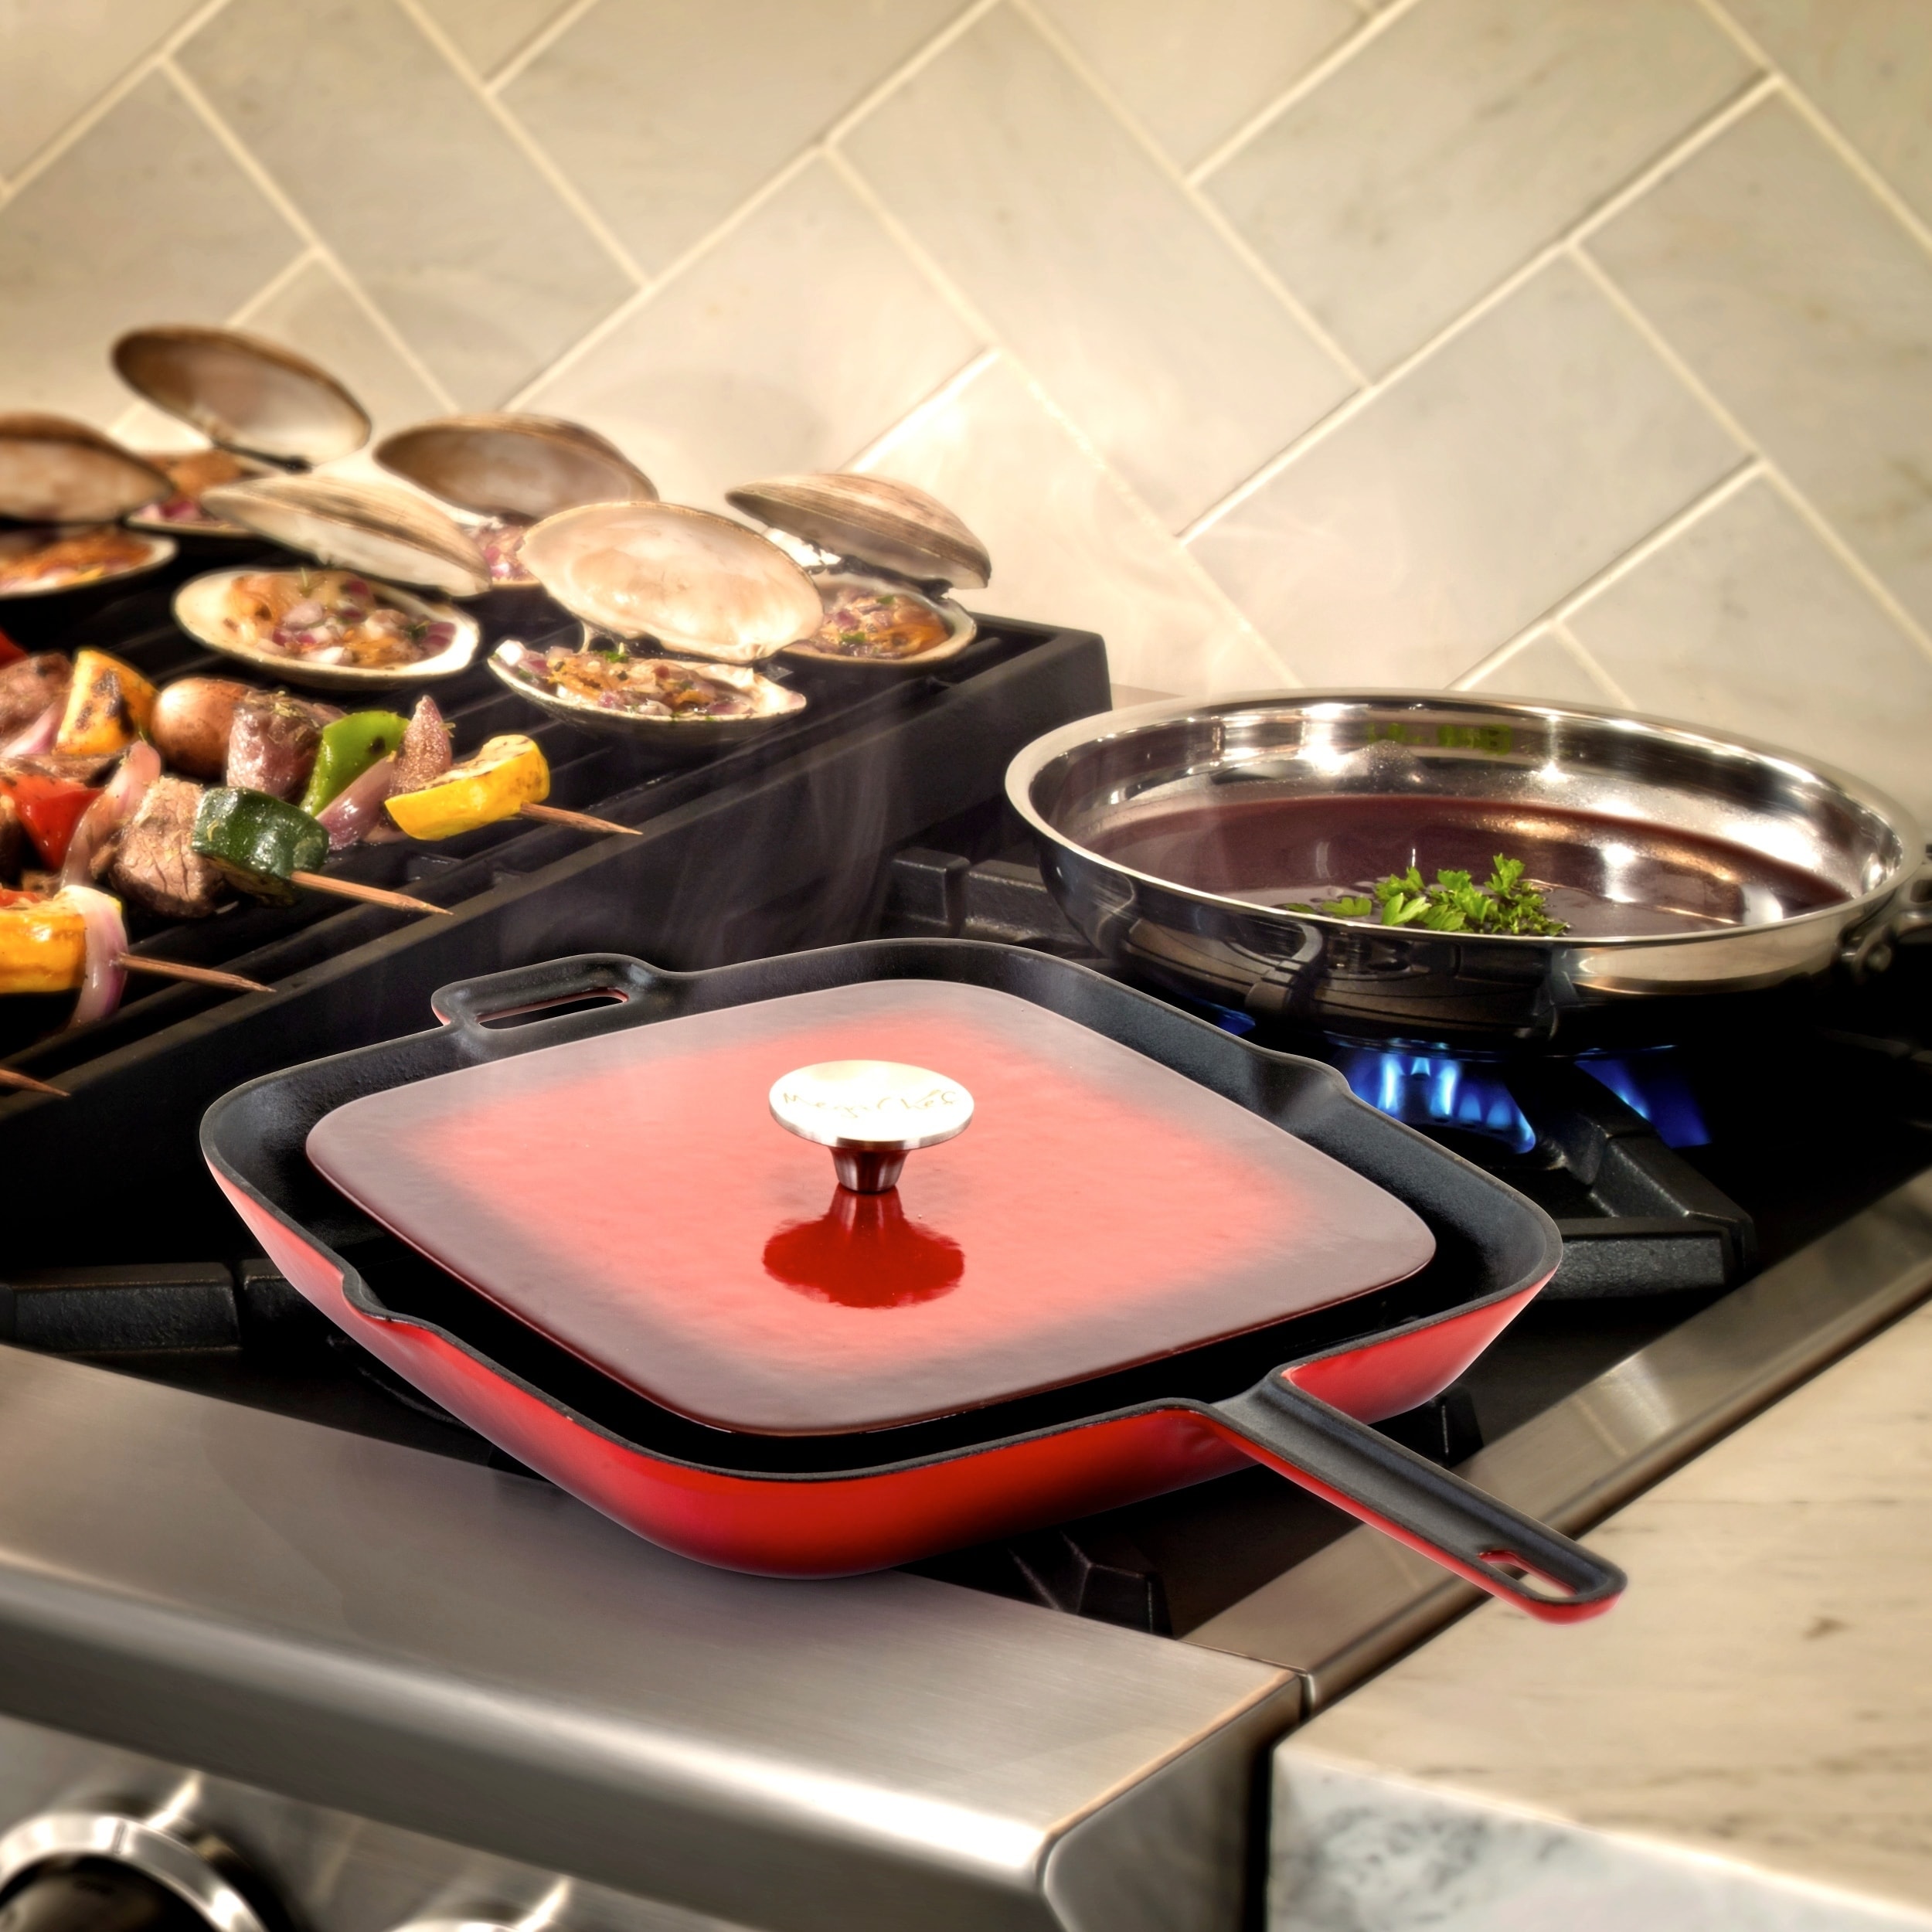 MegaChef 14 Inch Square Enamel Cast Iron Grill Pan in Red with Press -  9456170